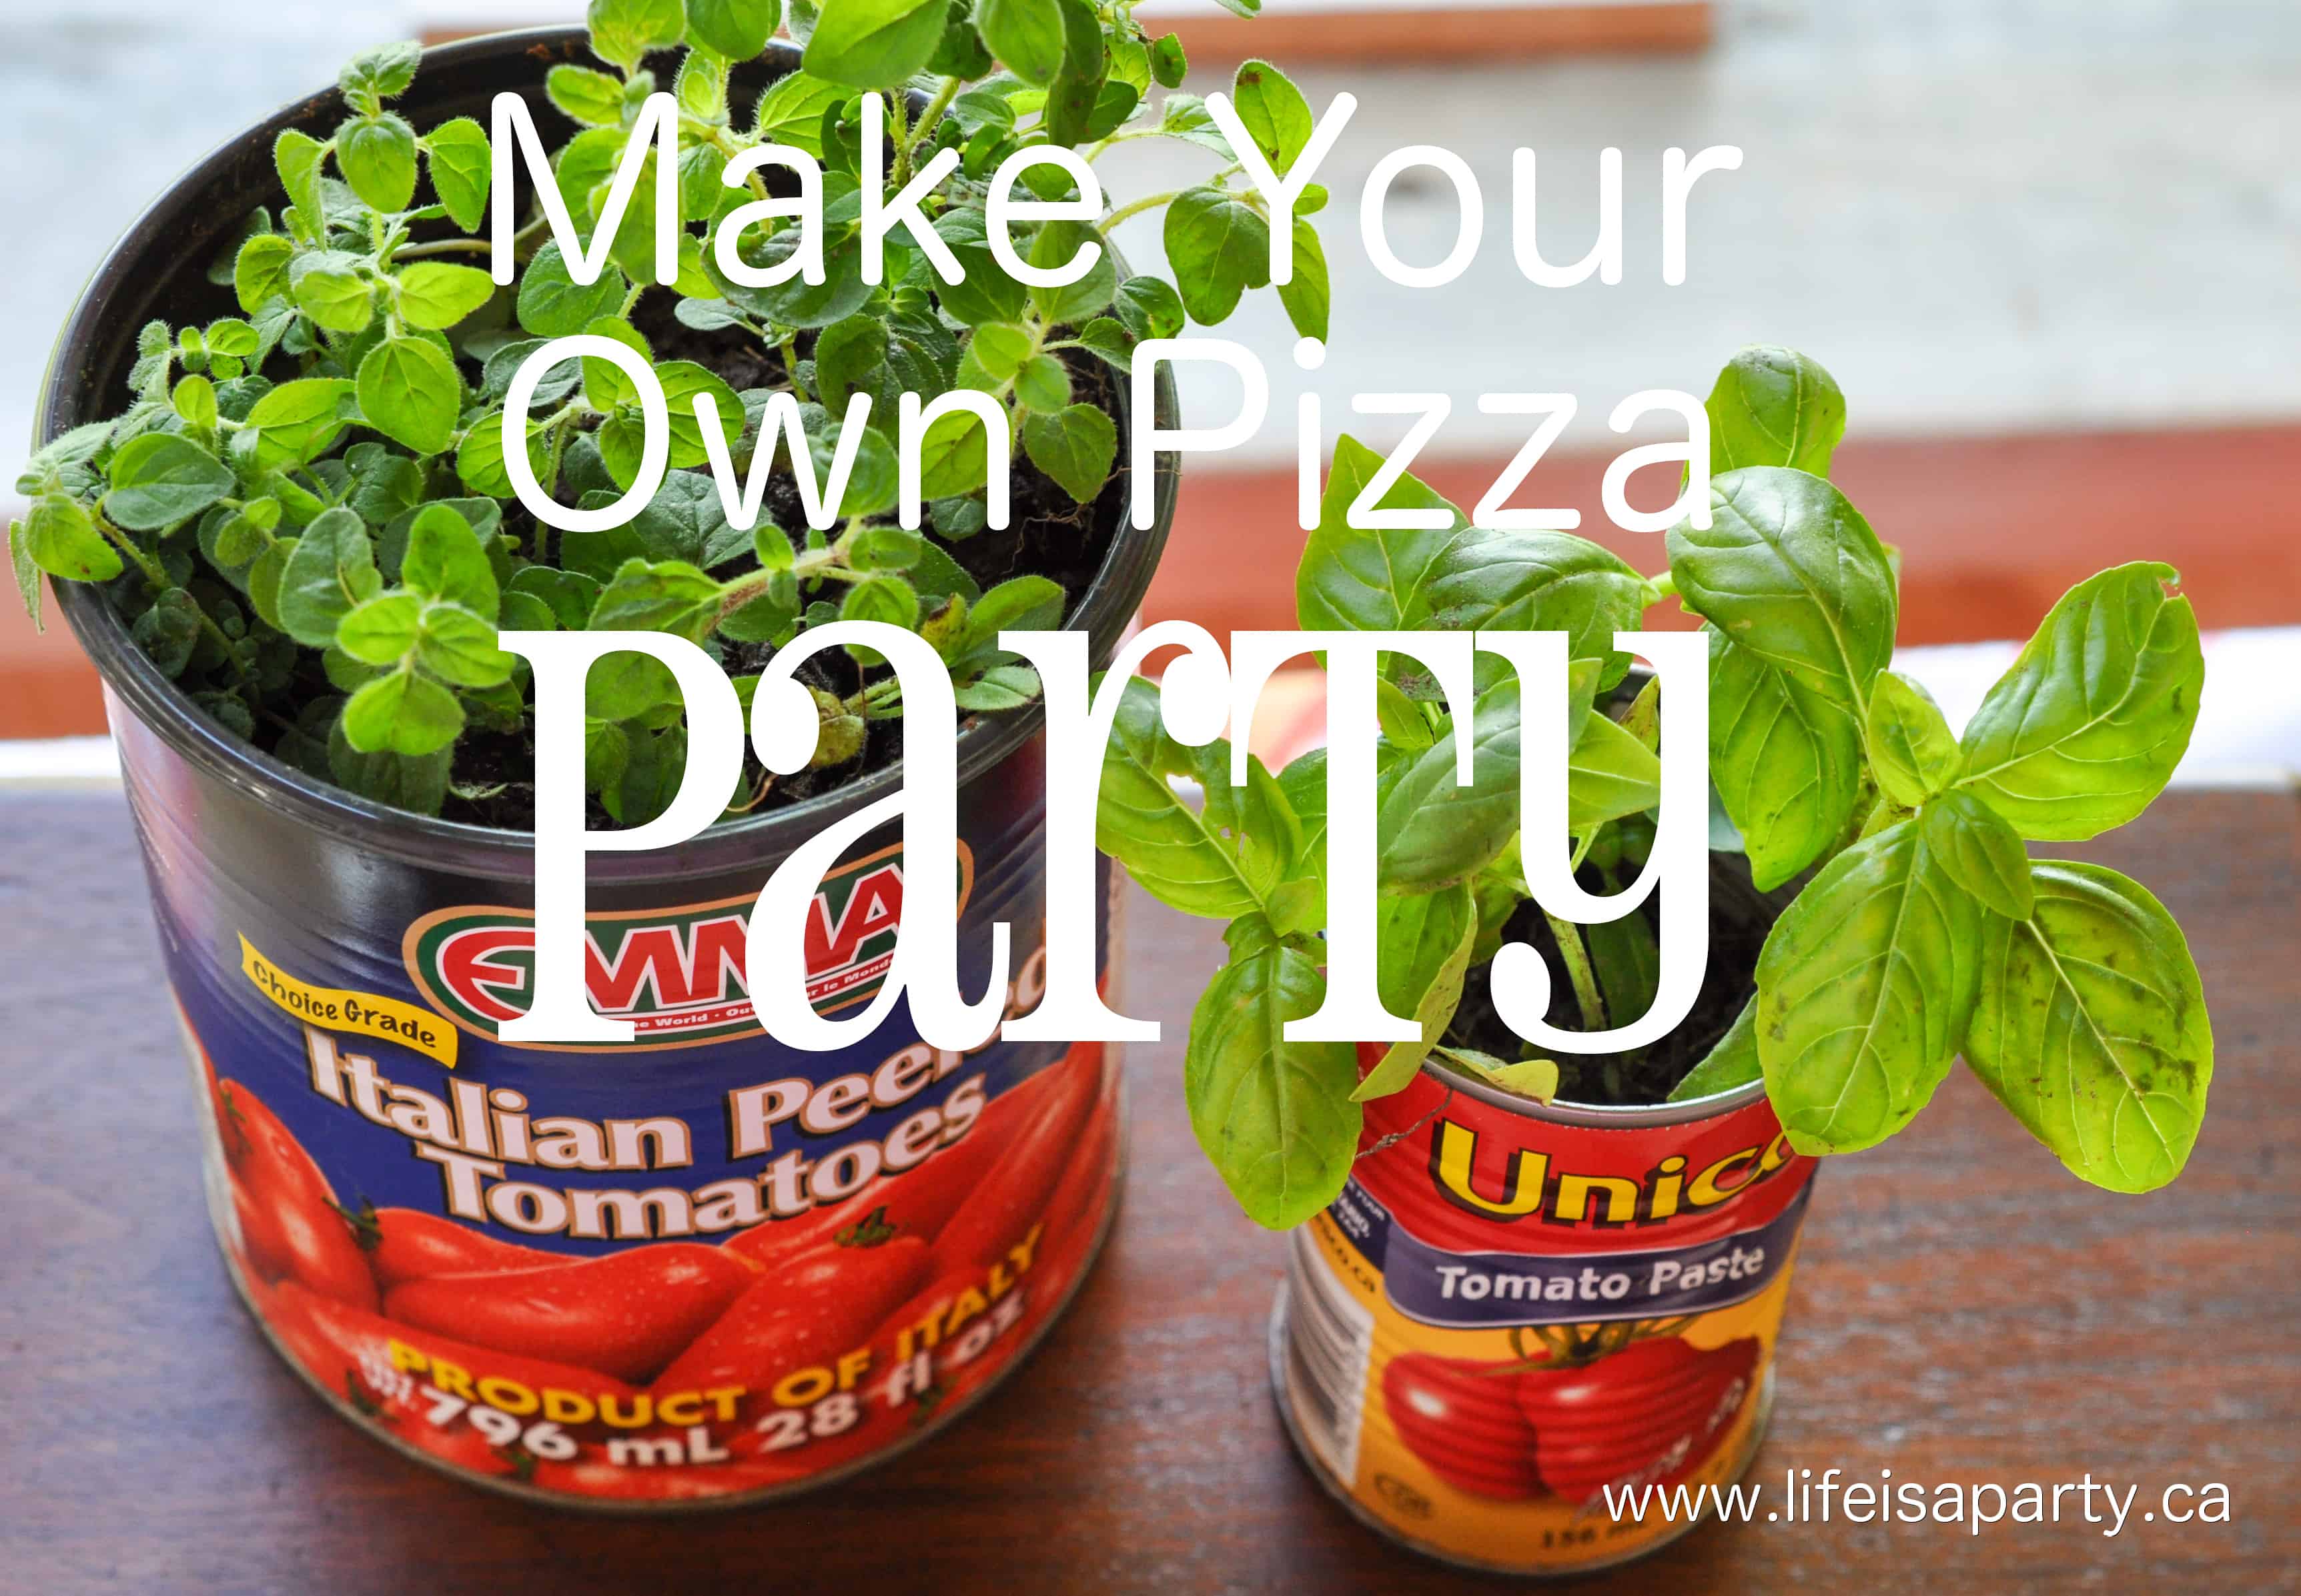 Make Your Own Pizza Party - perfect for entertaining, guests create their own pizza by choosing their toppings and cooking it on the outdoor bbq.